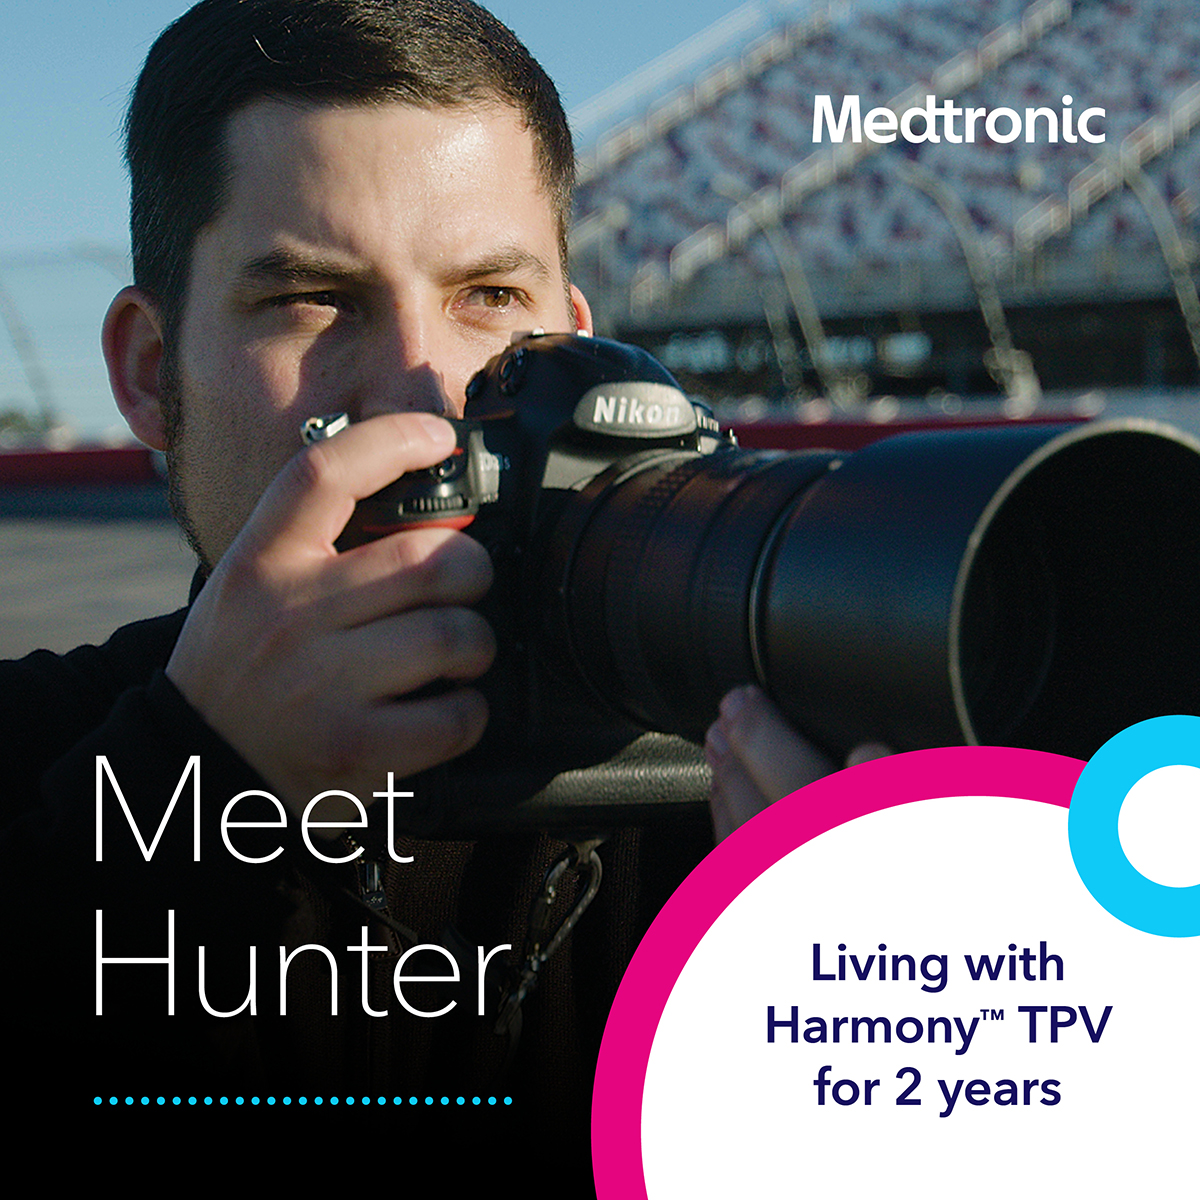 Two years ago, Hunter was one of the first Harmony™ TPV recipients. But today he's one of many patients living with this valve. Hear how his TPVR, time, & hard work has added up to health and happiness. See risk info bit.ly/3RizyTb | Learn more: bit.ly/46zSnWf